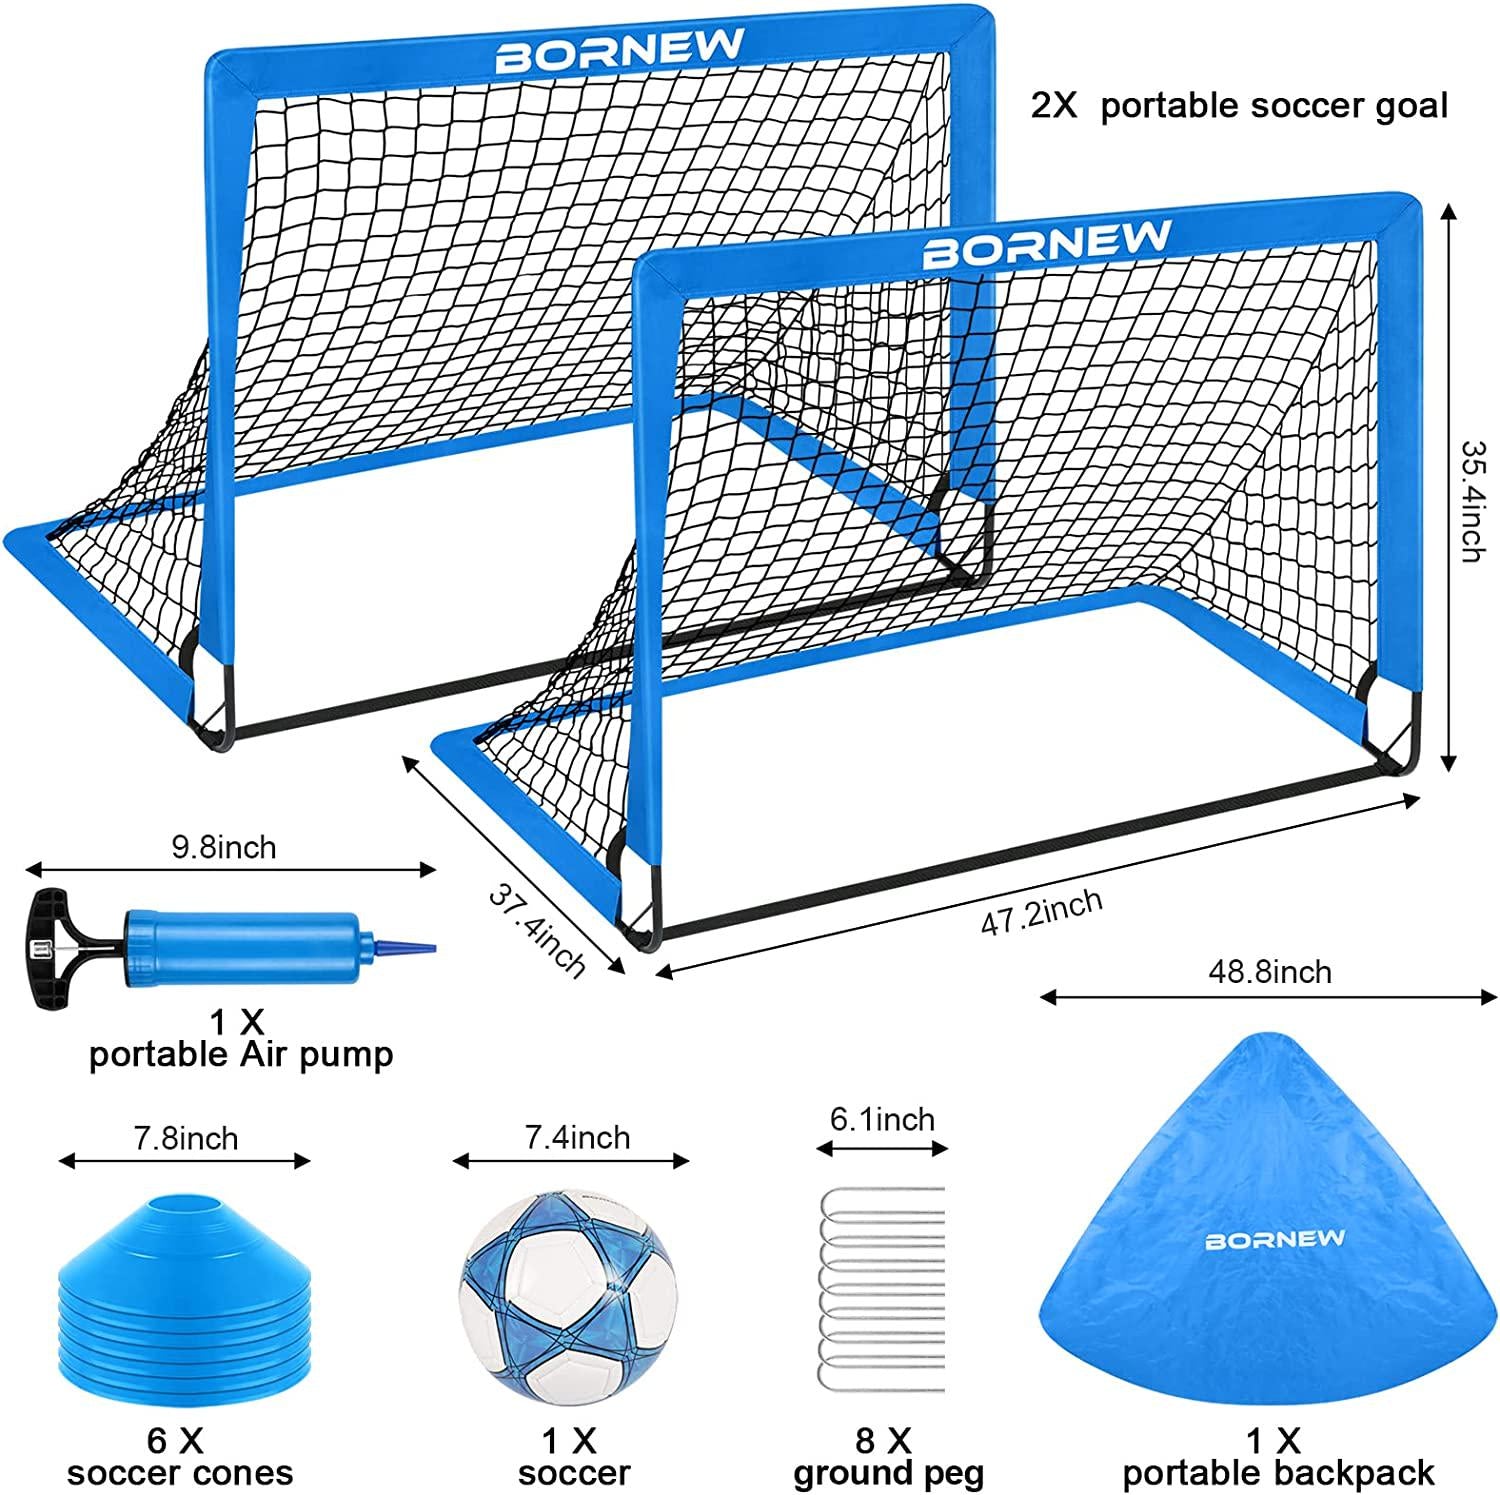 BORNEW, Kids Soccer Goal for Backyard Set - 2 Toddler Soccer Nets Training Equipment, Soccer Ball, Pop Up Portable Soccer Set for Kids and Youth Games and Training Goals - Size 4' x 3'